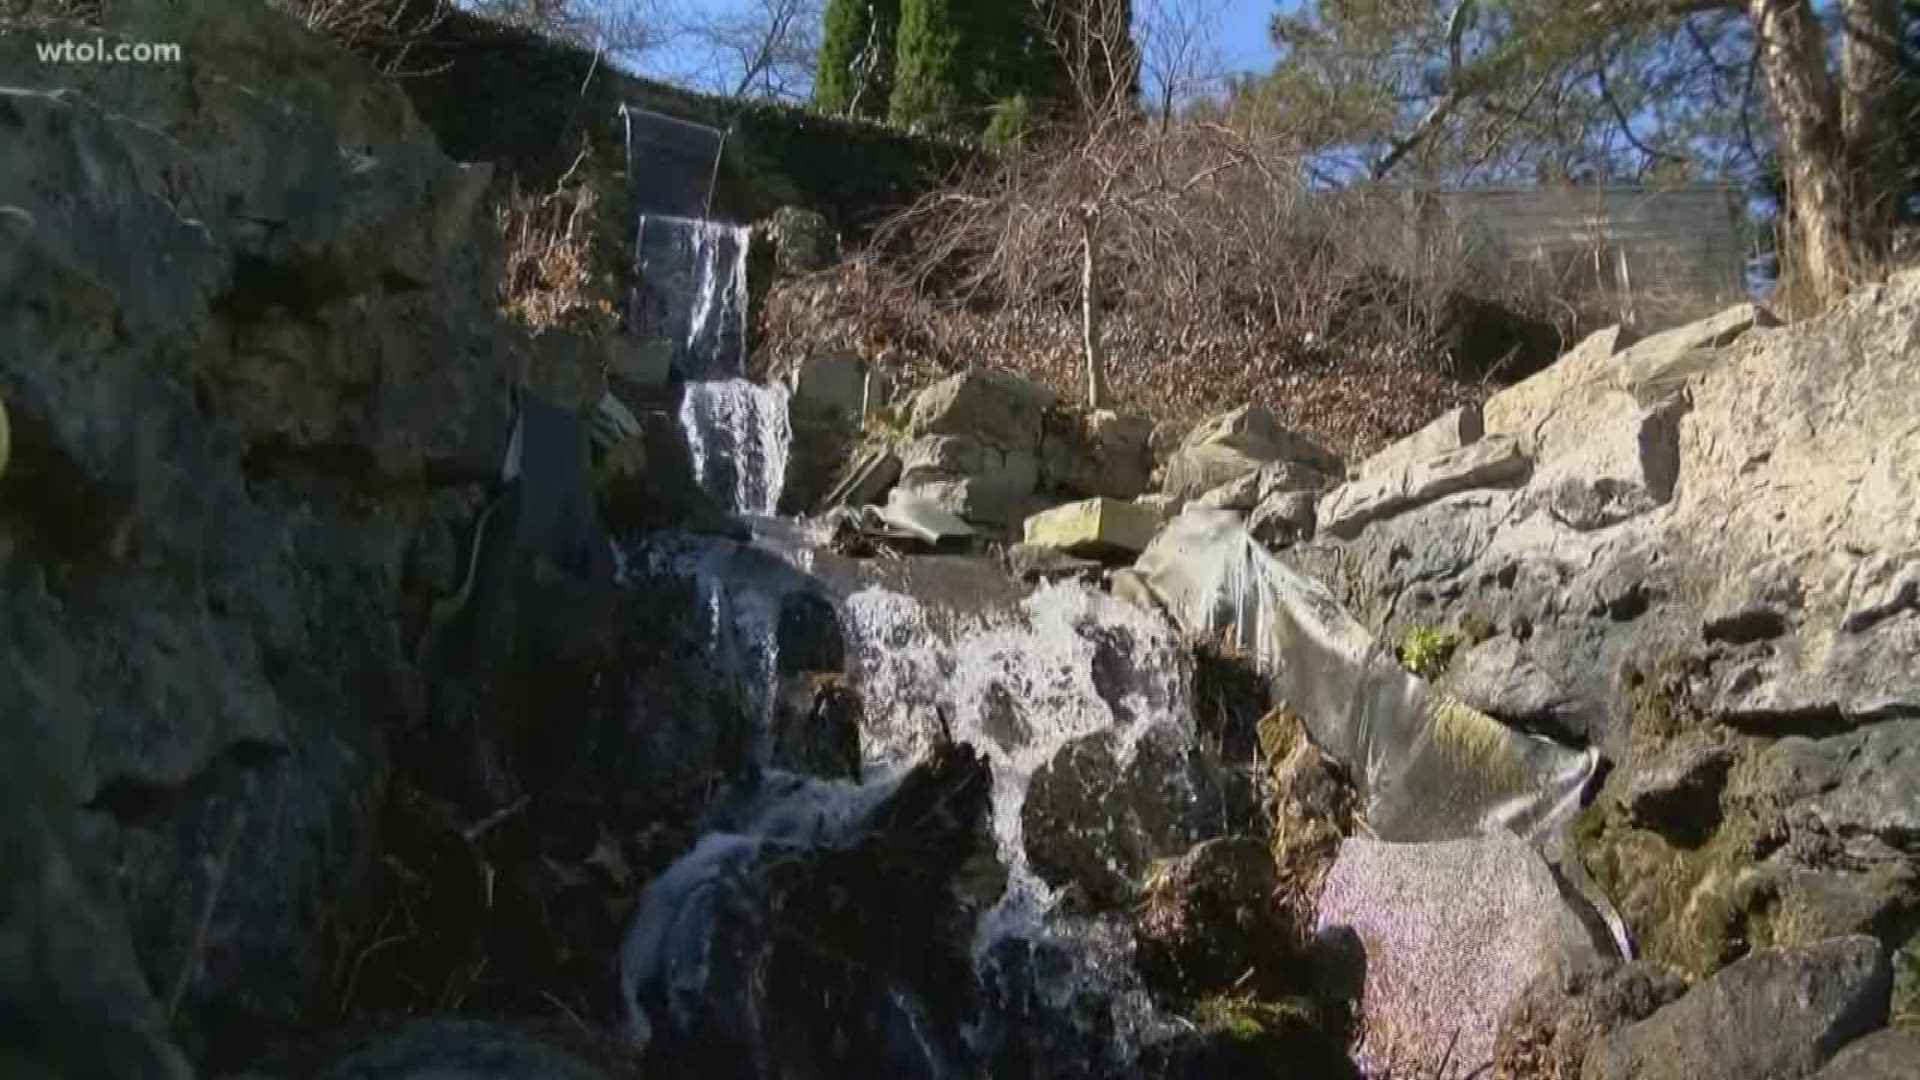 Because right now, we need it: The sights and sounds of nature at Schedel Gardens, captured by 
WTOL 11 photojournalist and operations manager Paul Kwapich.